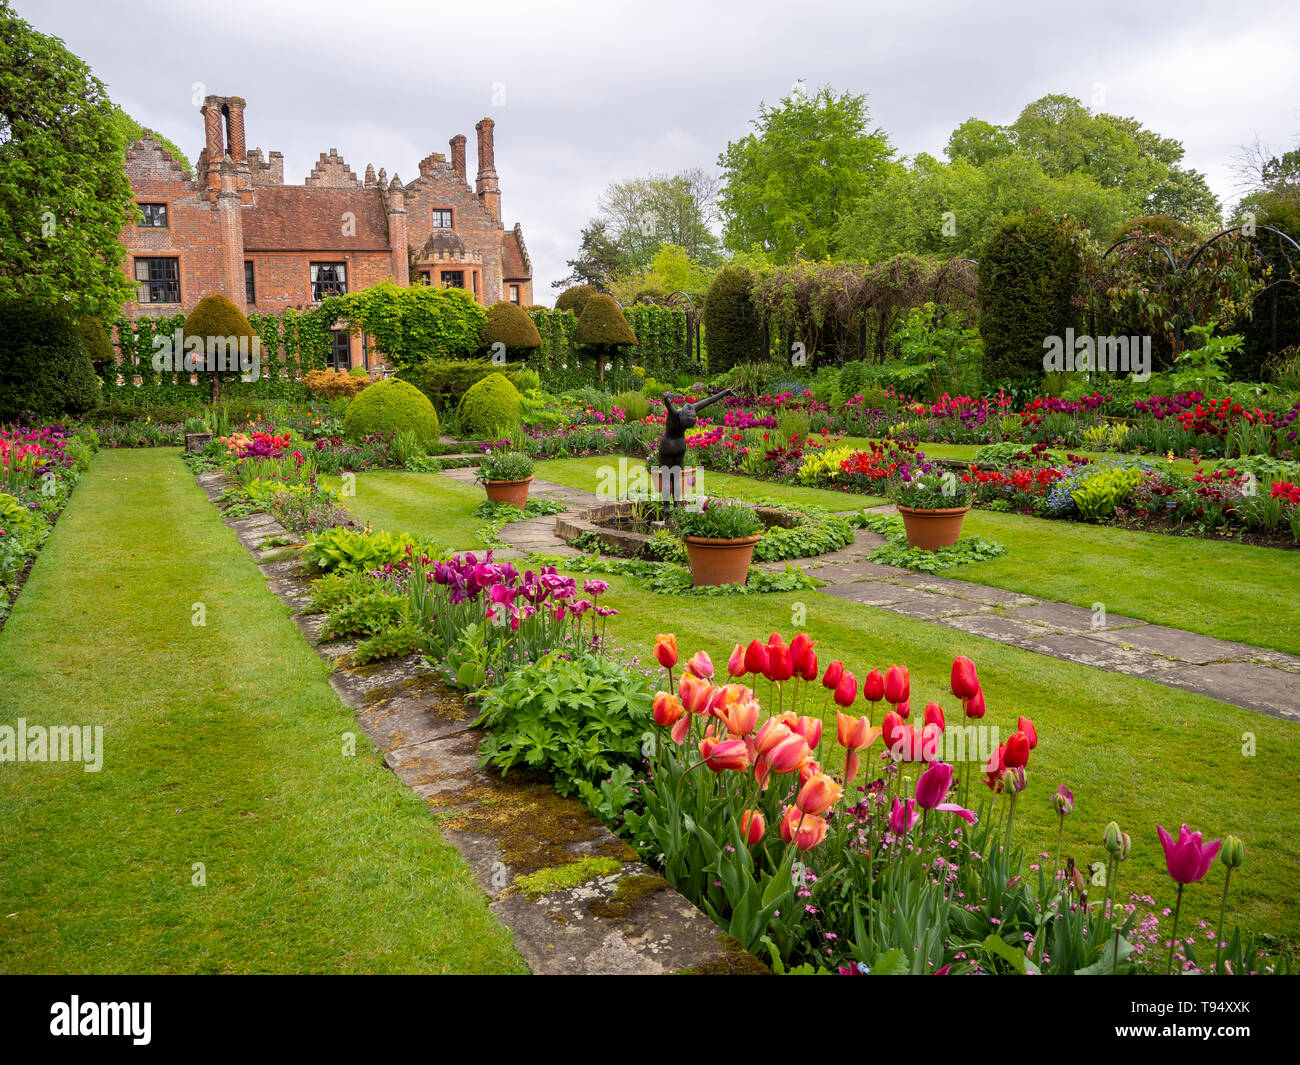 Chenies Manor House and Sunken garden in May with colourful tulip varieties, ornamental pond, sculpture, topiary, trellis and fresh green lawn.. Stock Photo